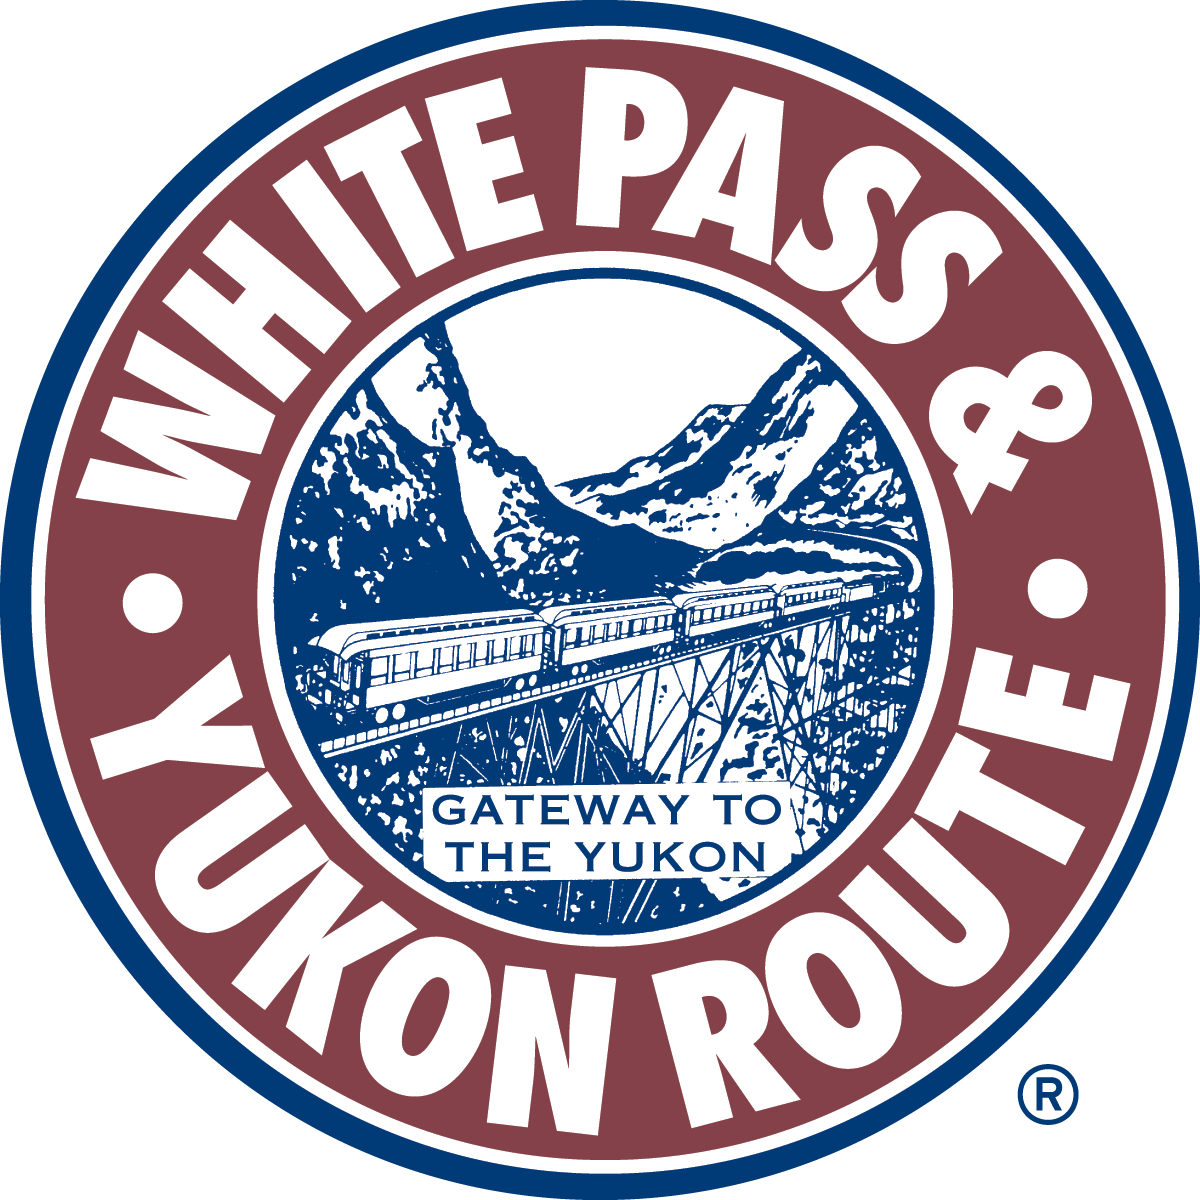 White Pass - Alaska's most popular Shore Excursion in Skagway